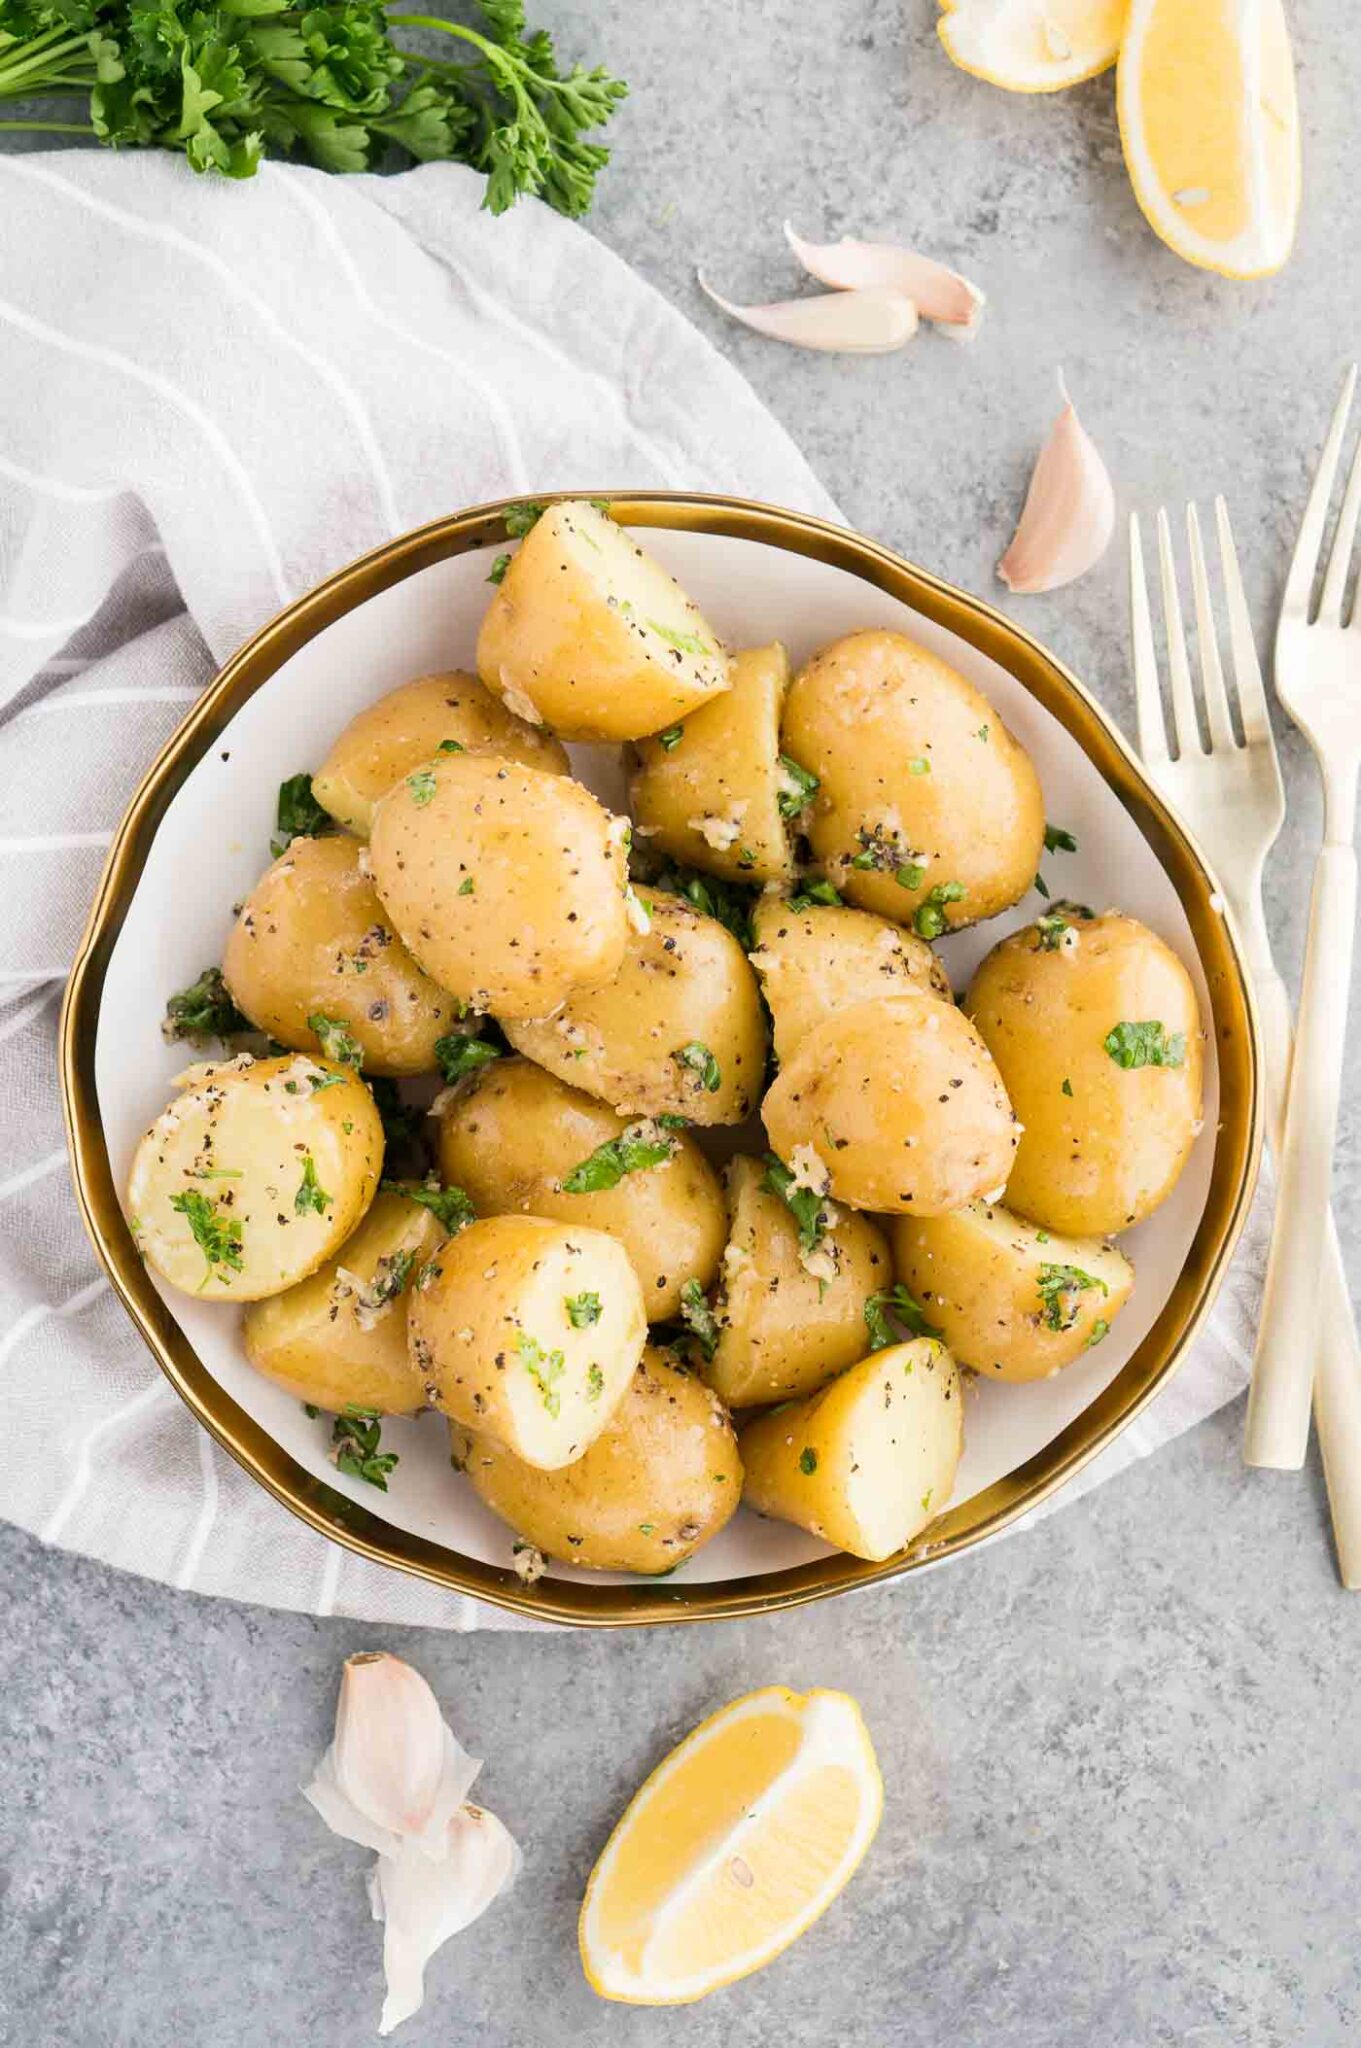 image from above of cooked potatoes on a plate